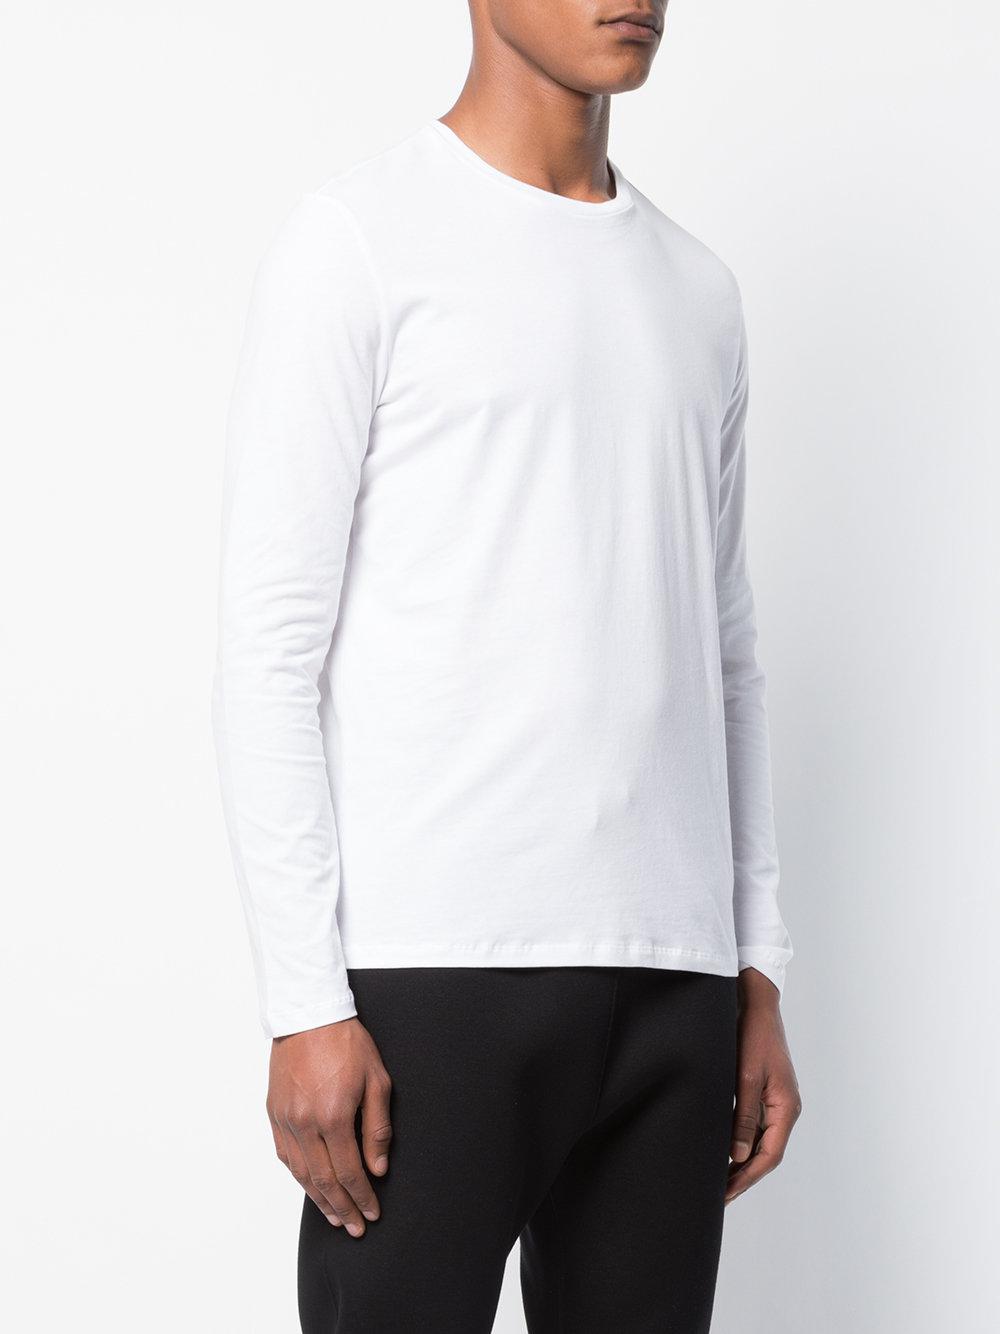 Majestic Filatures Cotton Long Sleeve Crew-neck Tee in White for Men - Lyst